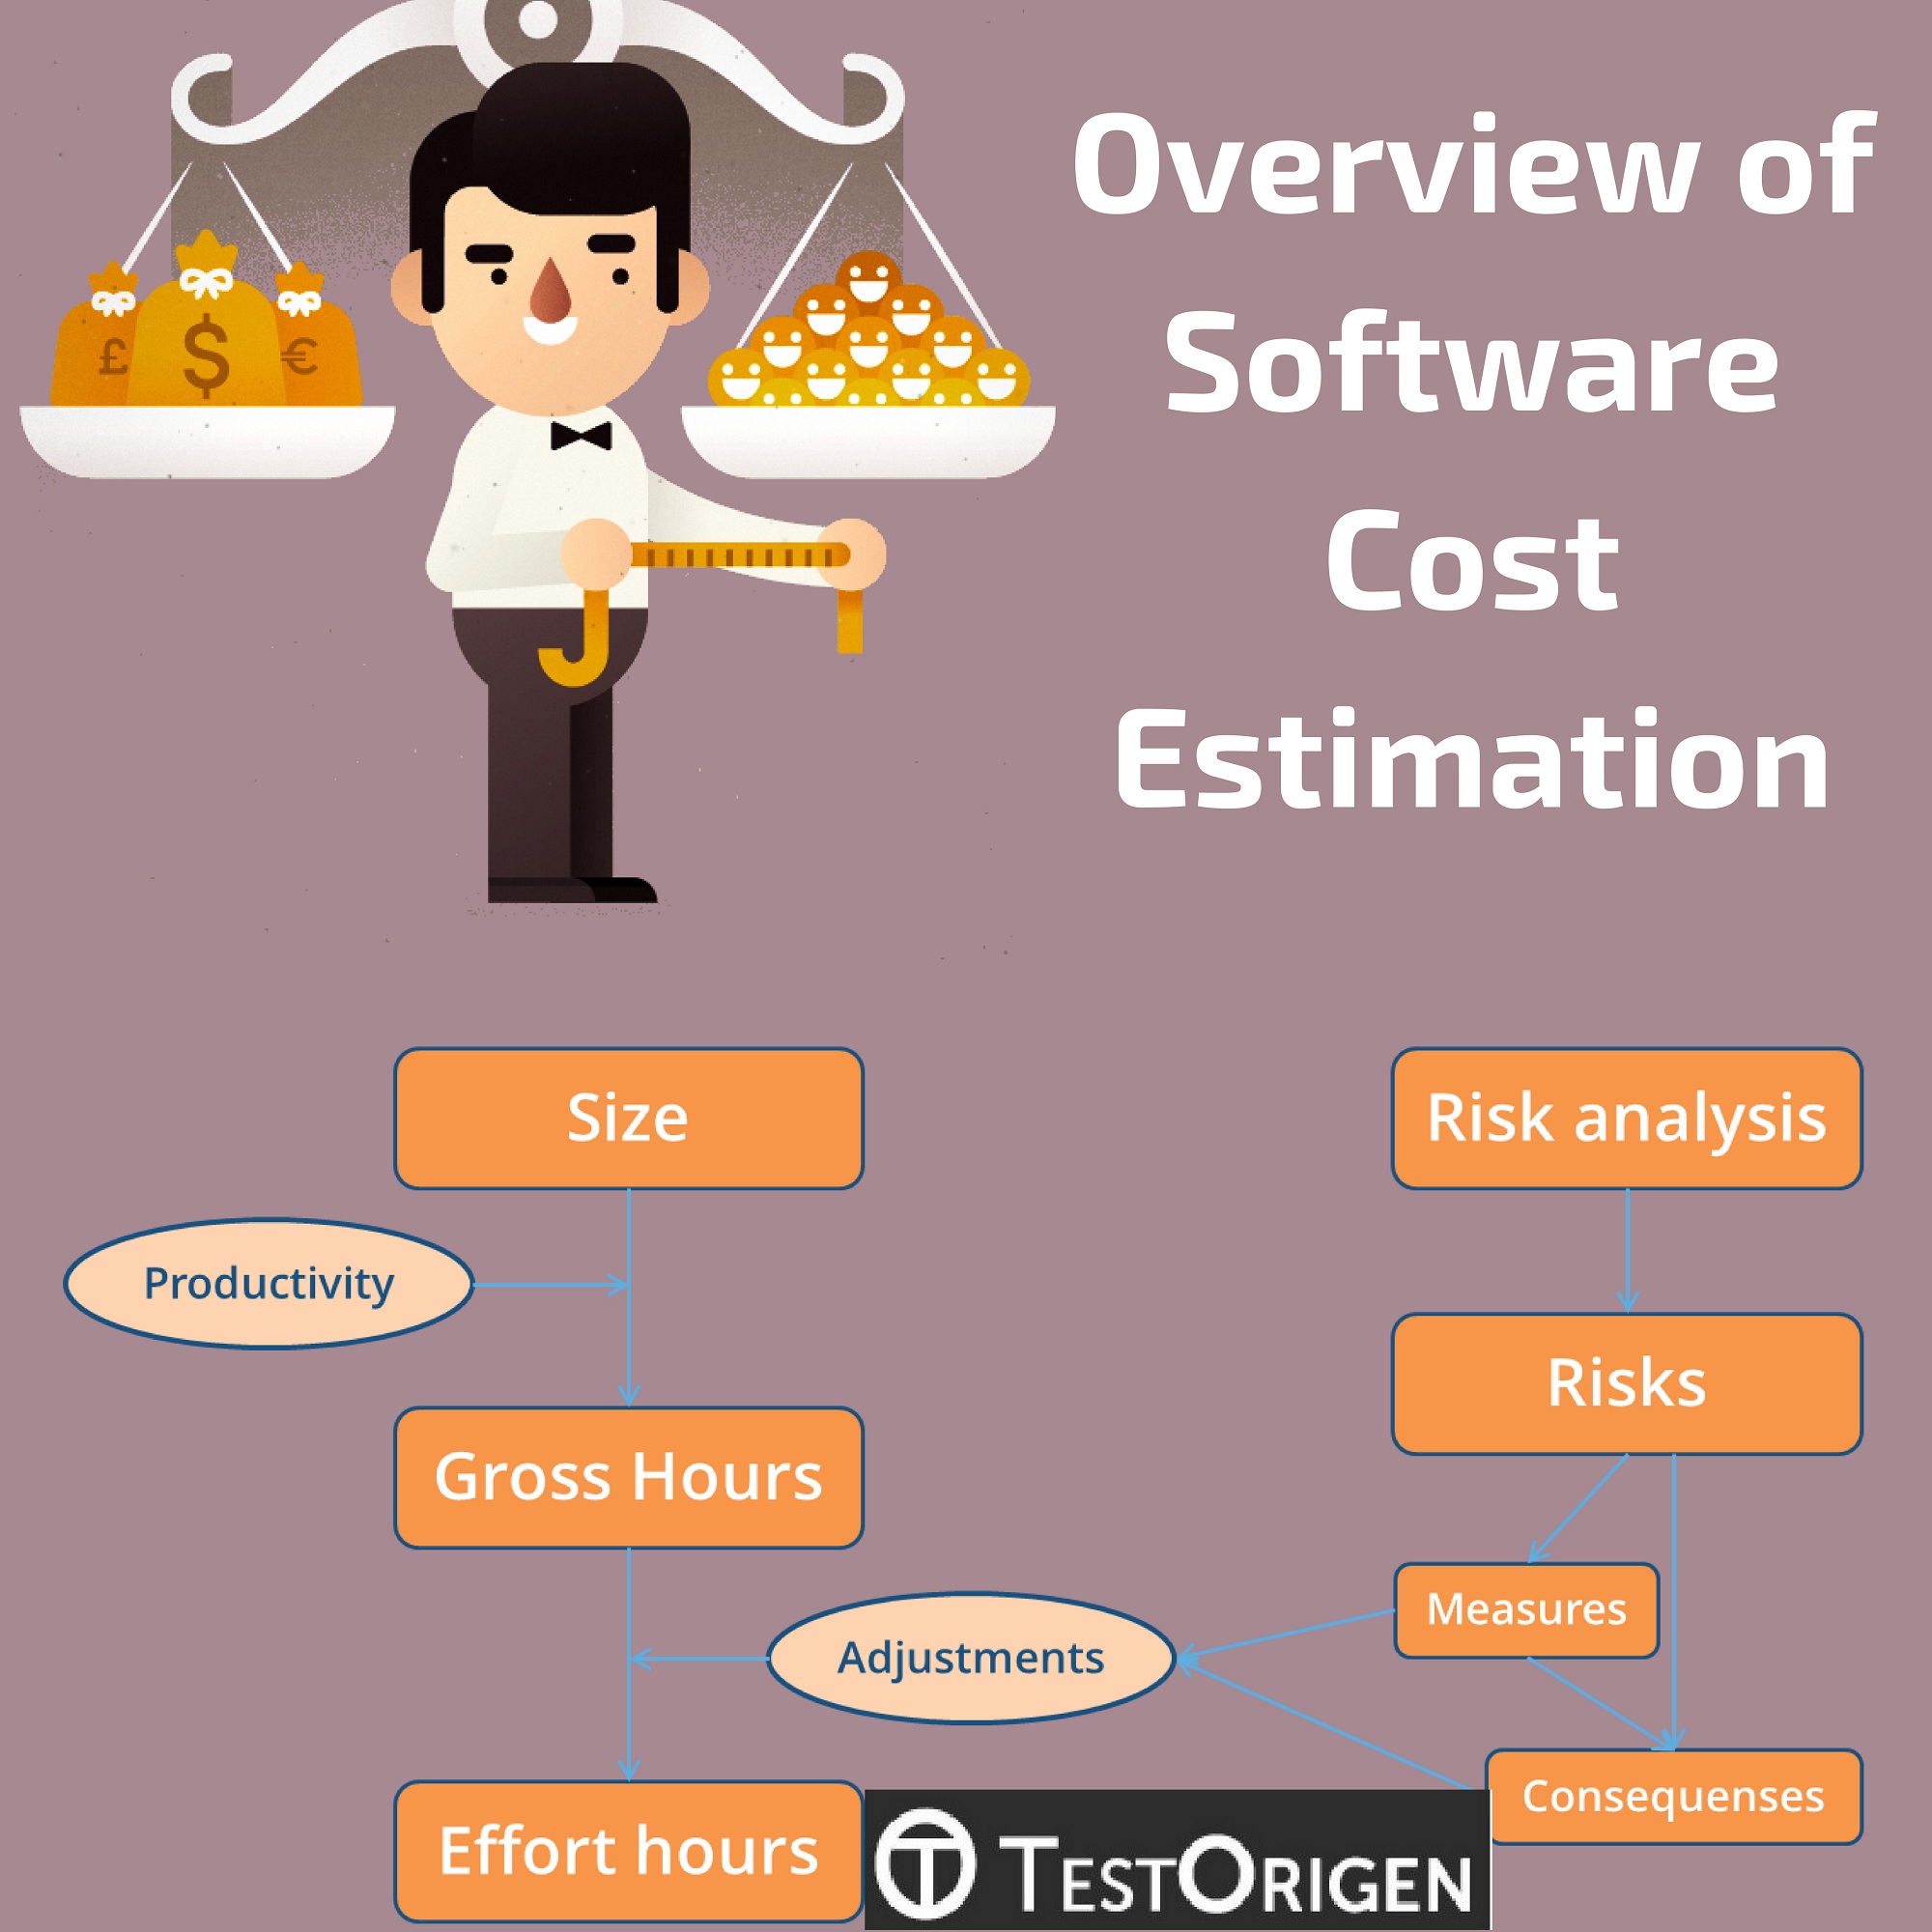 Overview of Software Cost Estimation